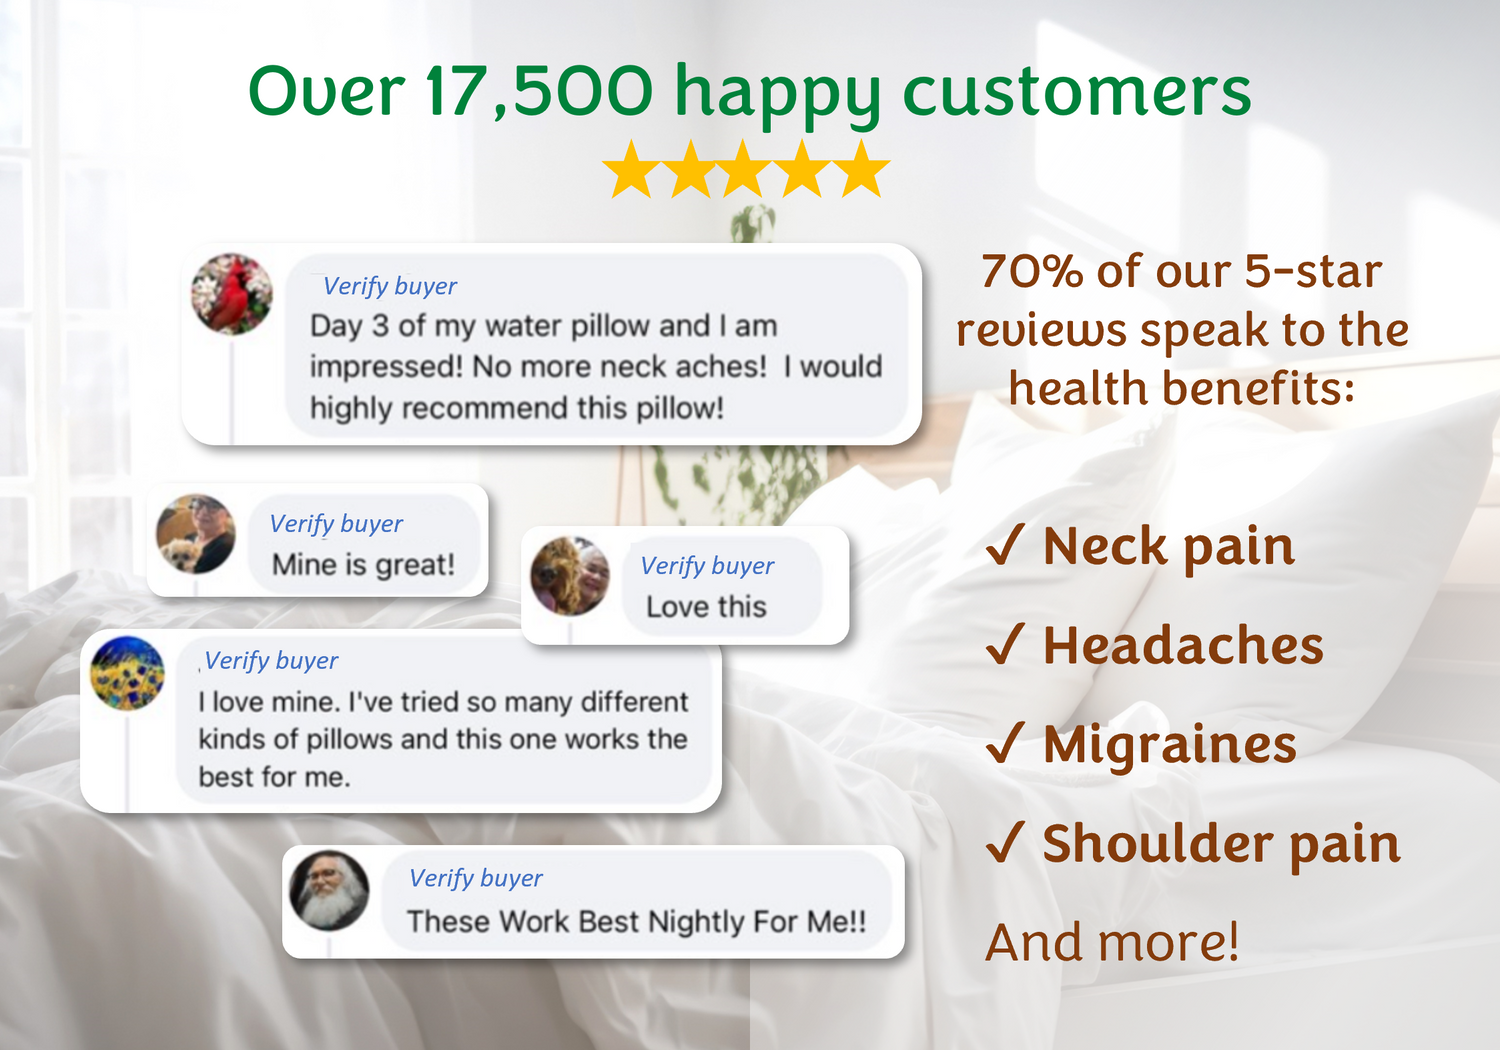 Over 17,500 happy customers. 70% of our 5-star reviews speak to the health benefits: neck pain, headaches, migraines, shoulder pain and more!